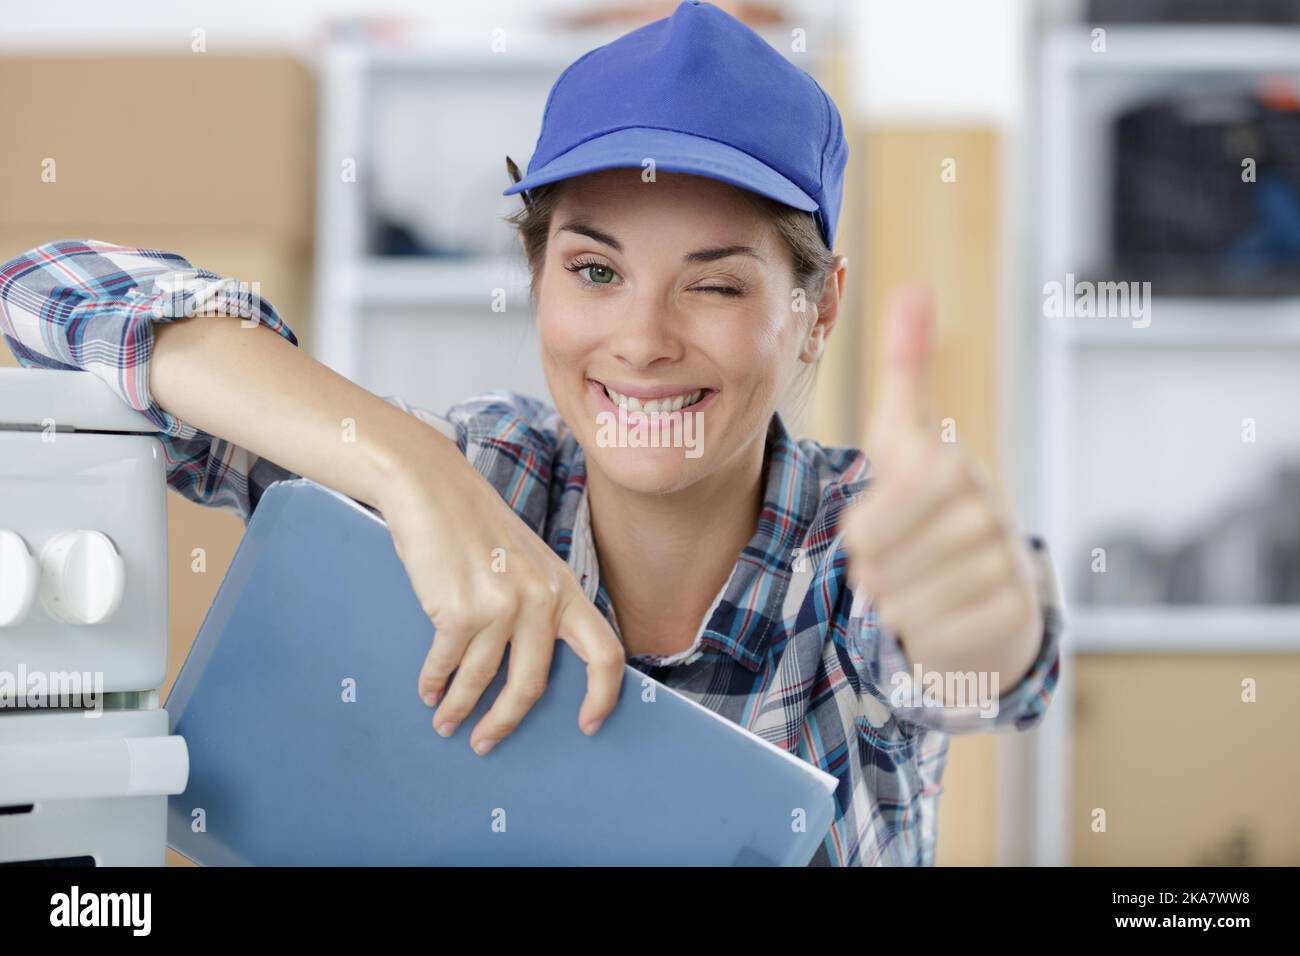 servicewoman winking and holding thumbs up Stock Photo